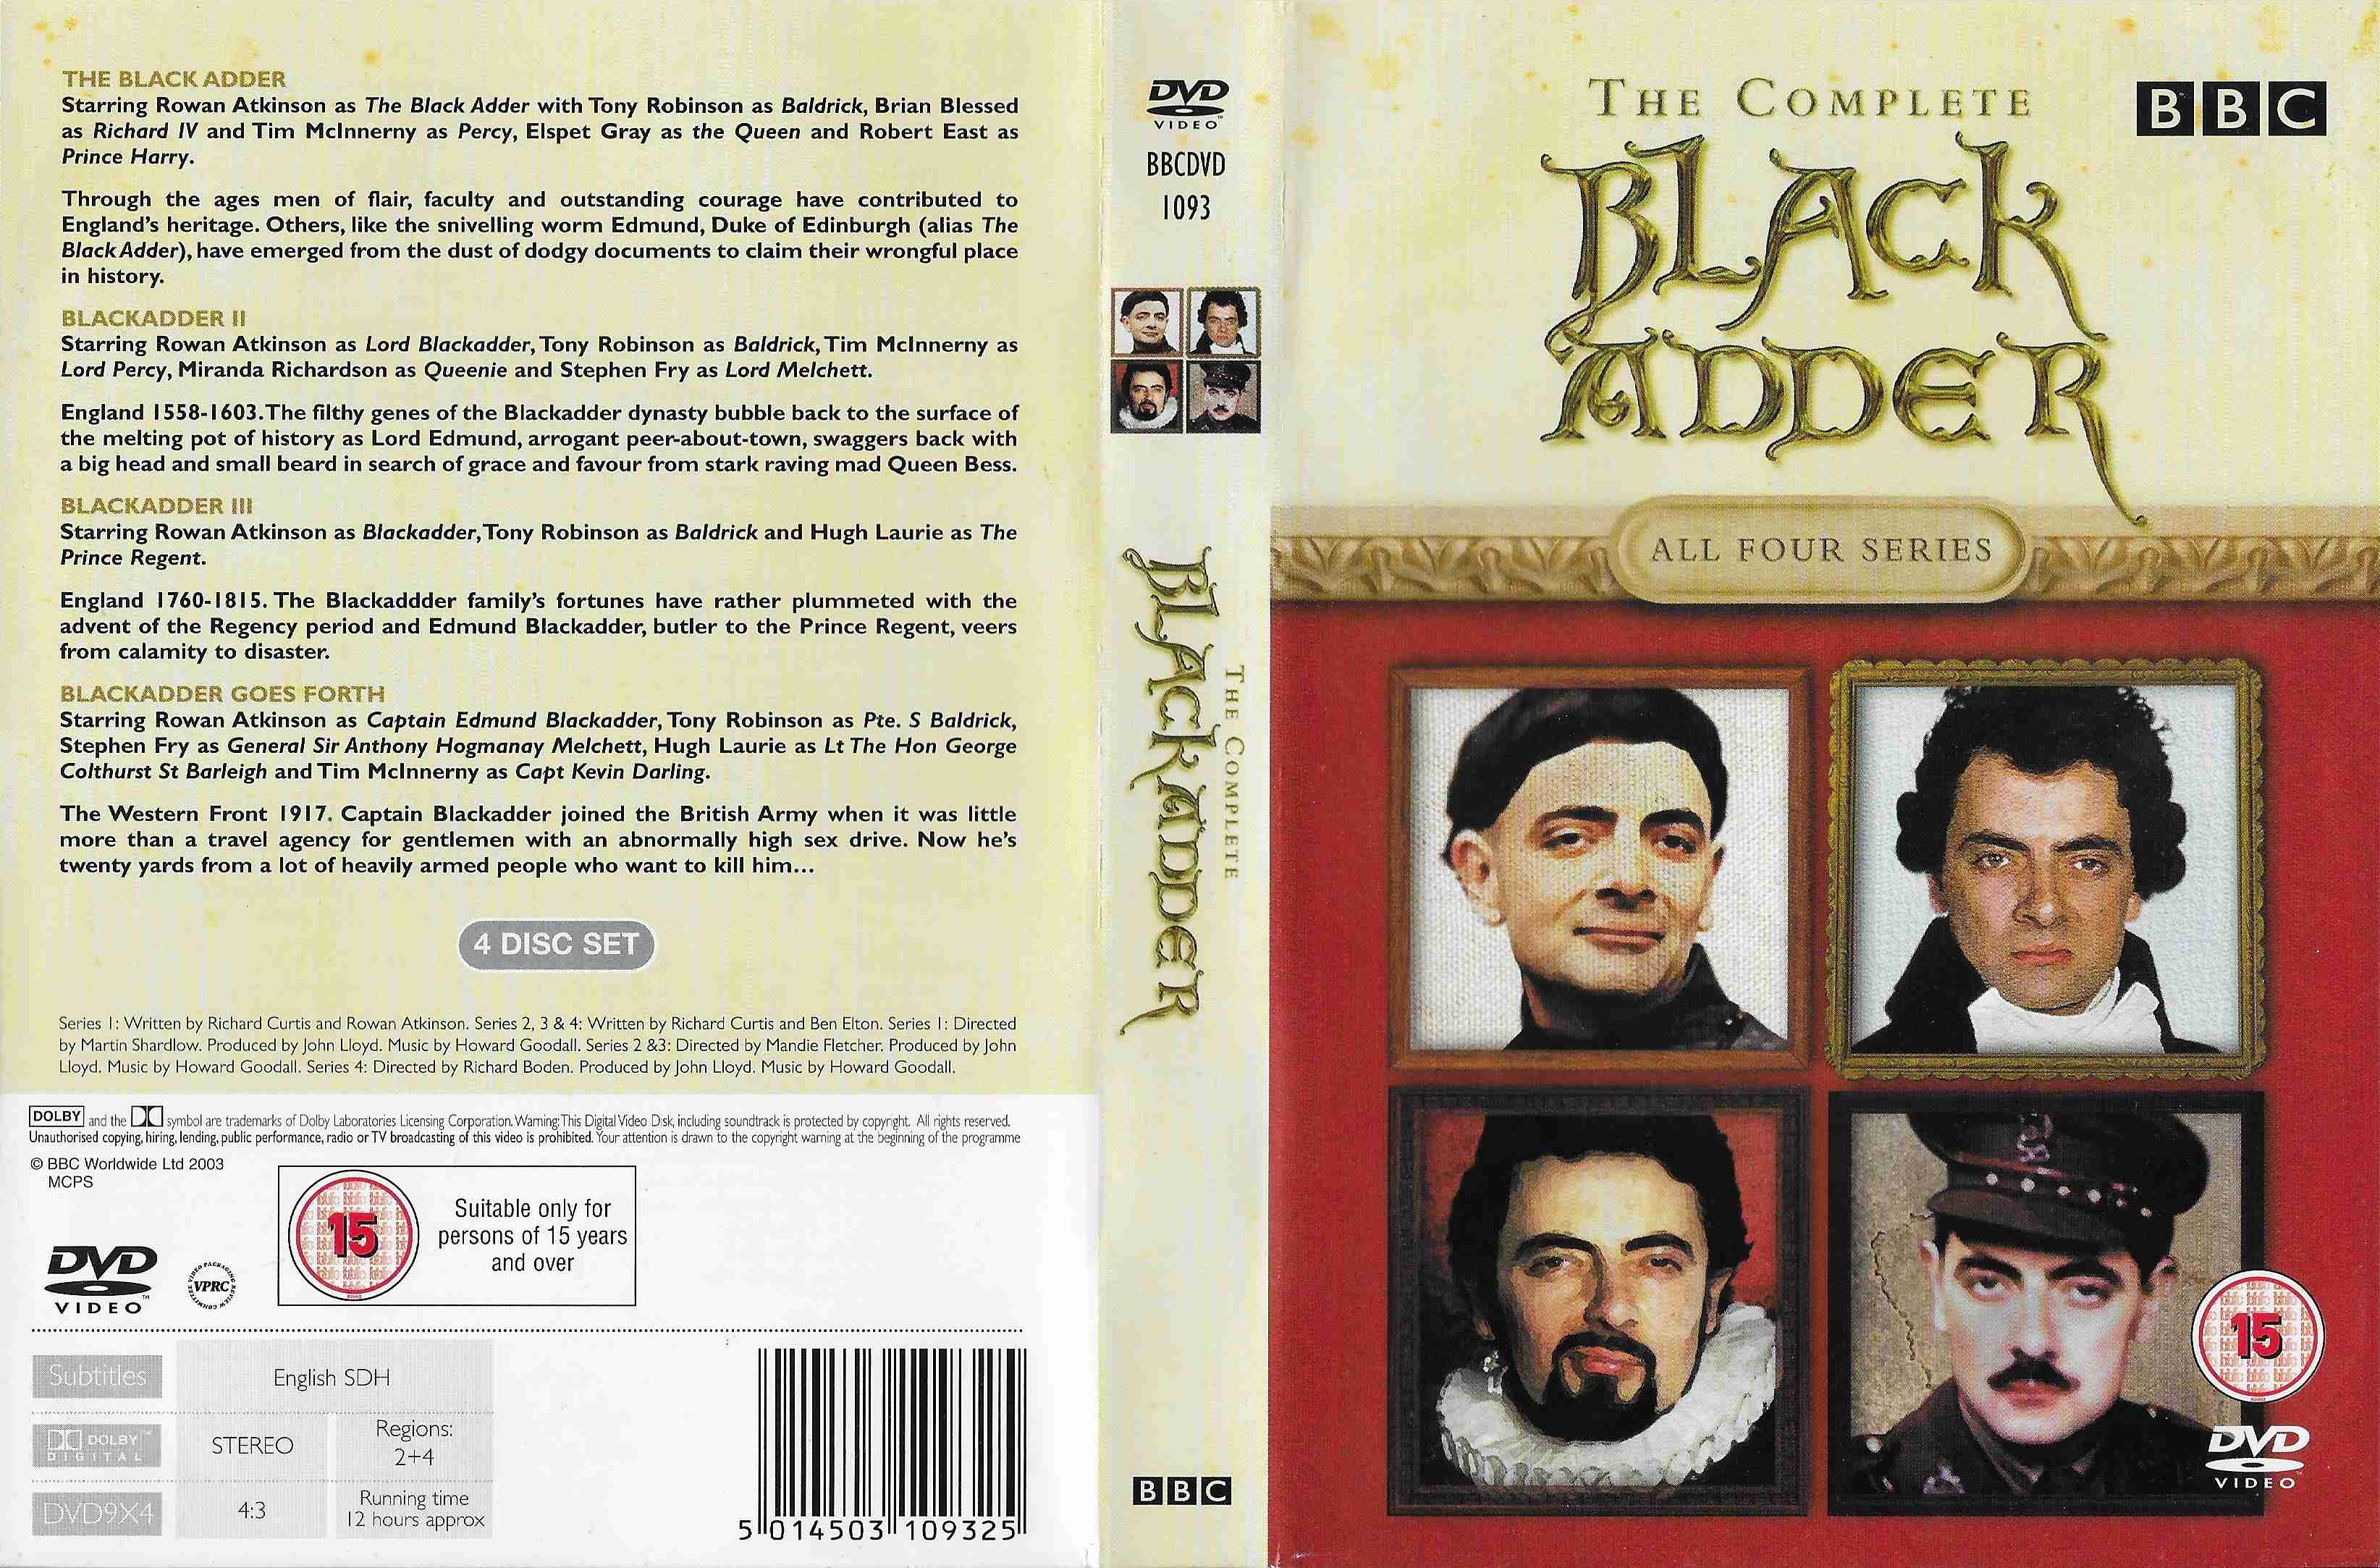 Picture of BBCDVD 1093 The complete Black Adder by artist Rowan Atkinson / Richard Curtis / Ben Elton from the BBC records and Tapes library